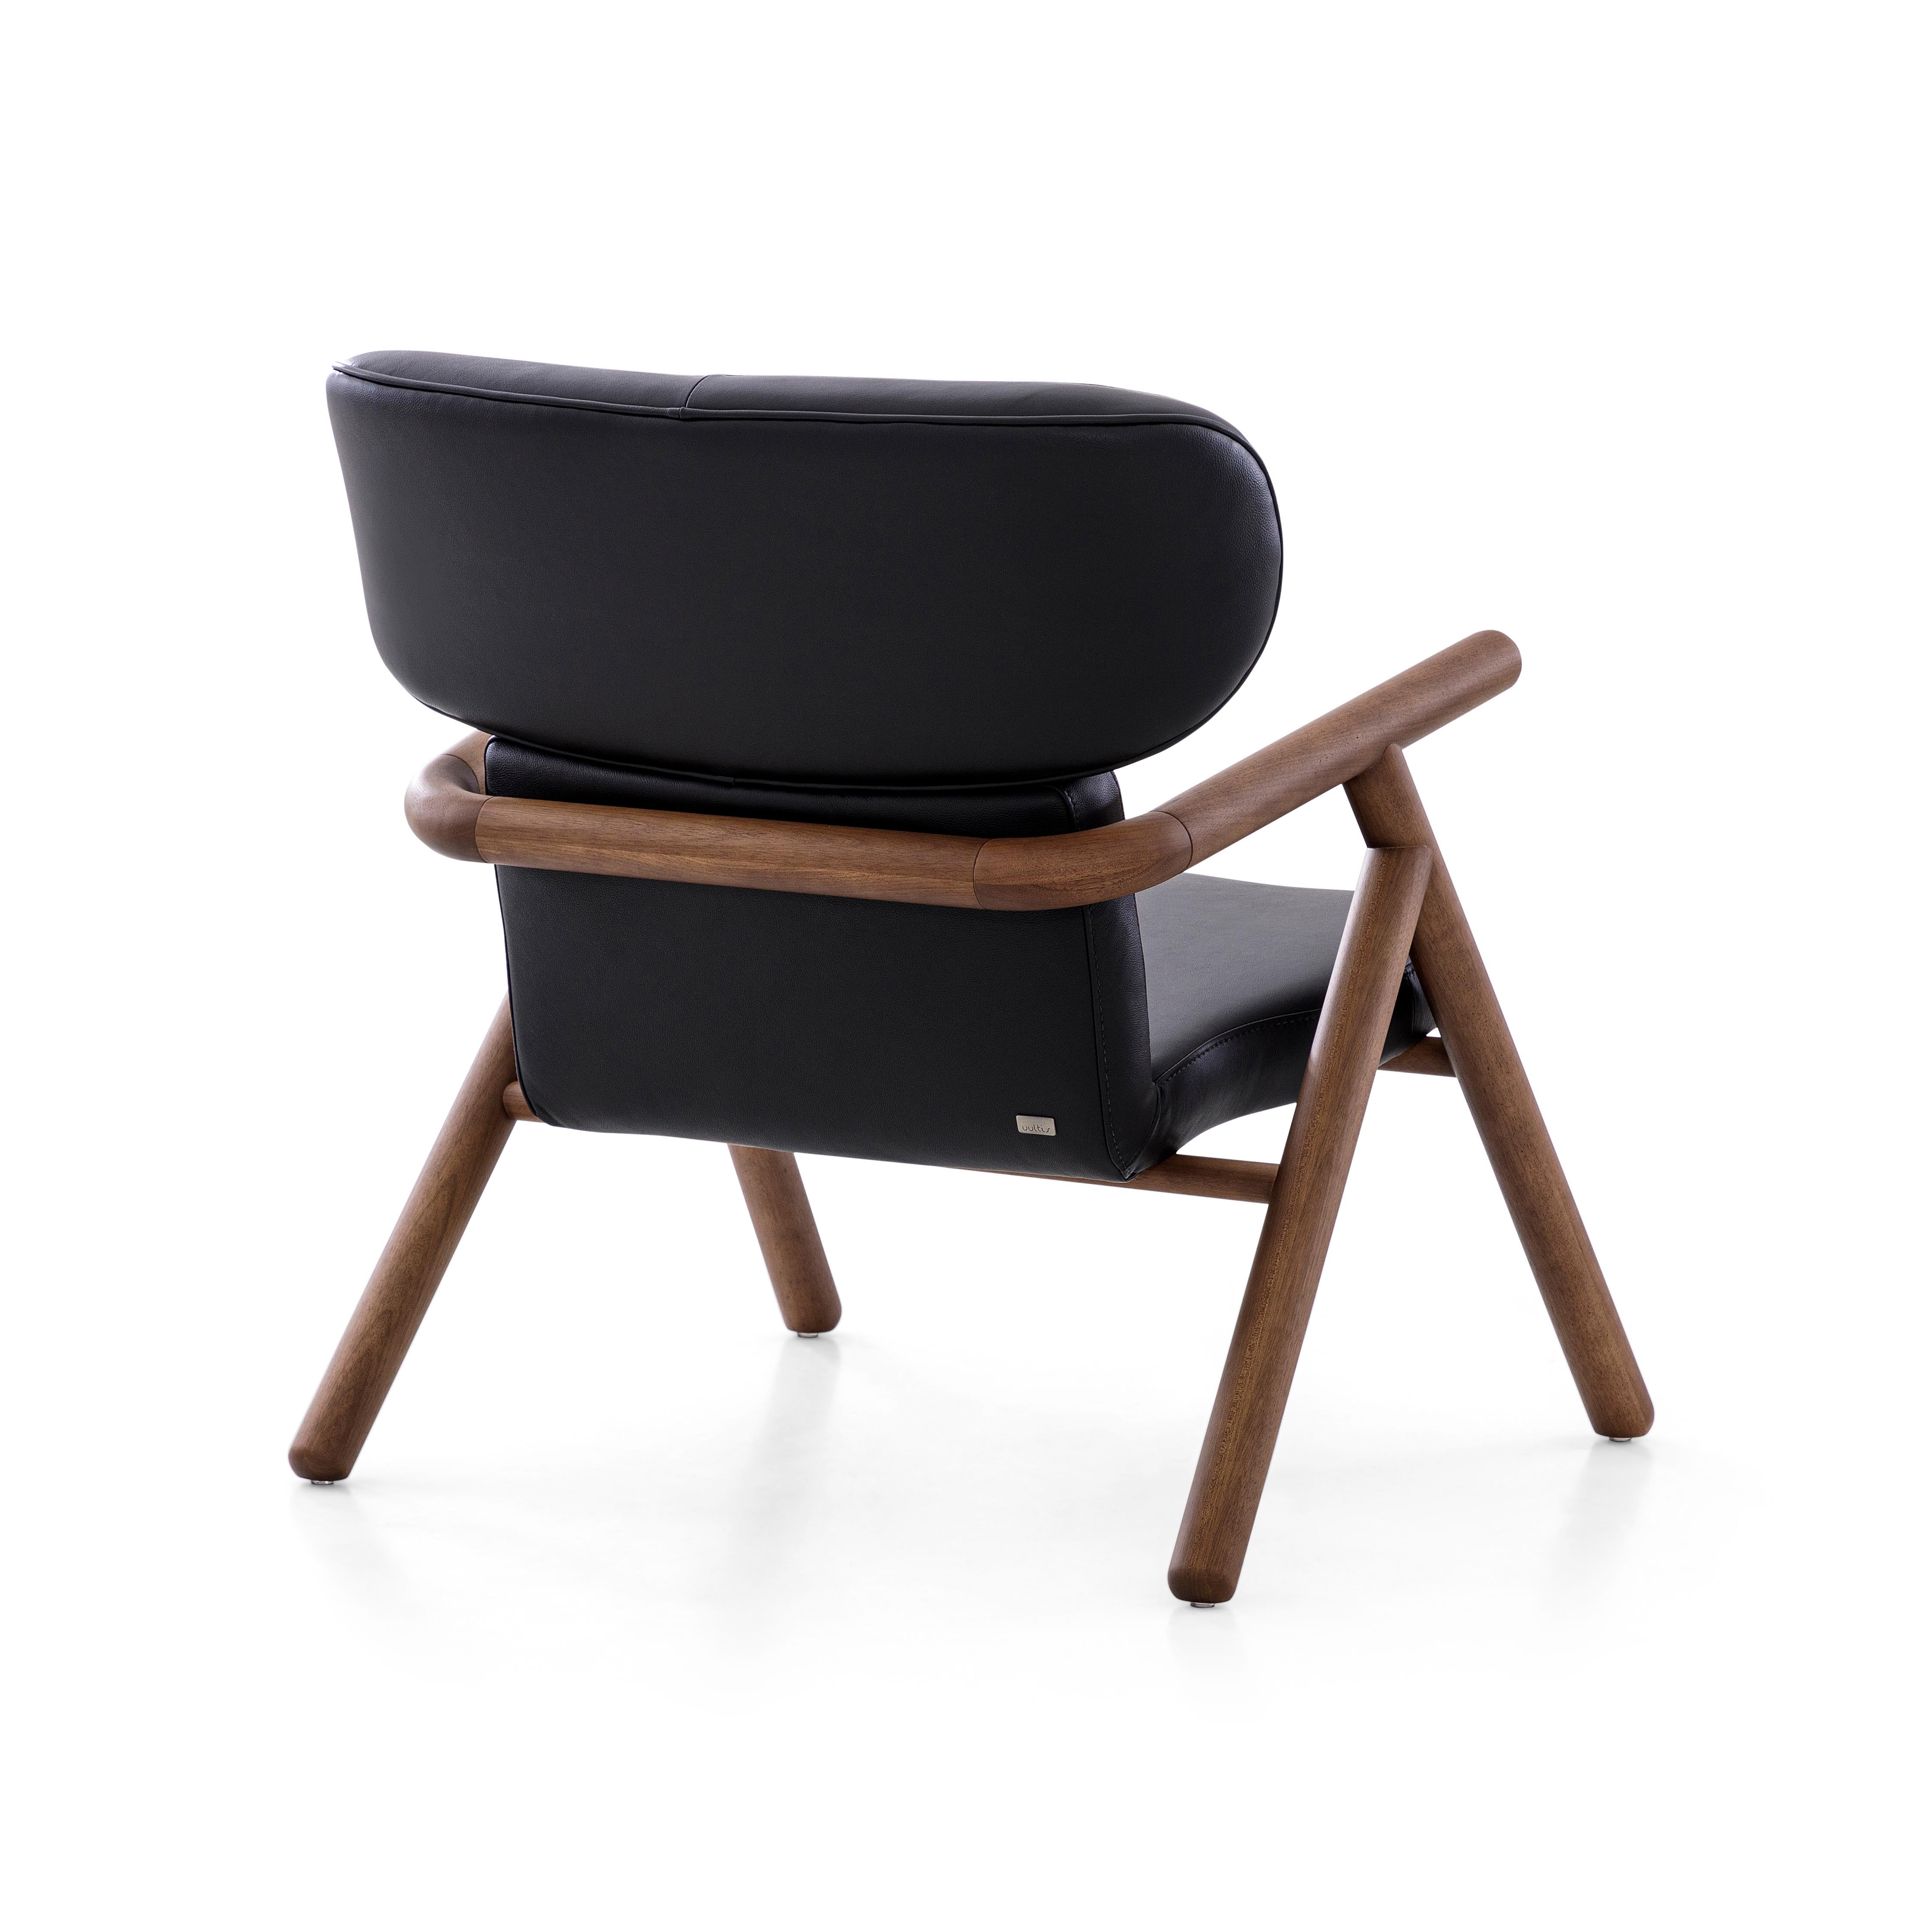 Sole Scandinavian-Styled Armchair in Walnut Wood Finish and Black Leather In New Condition For Sale In Miami, FL